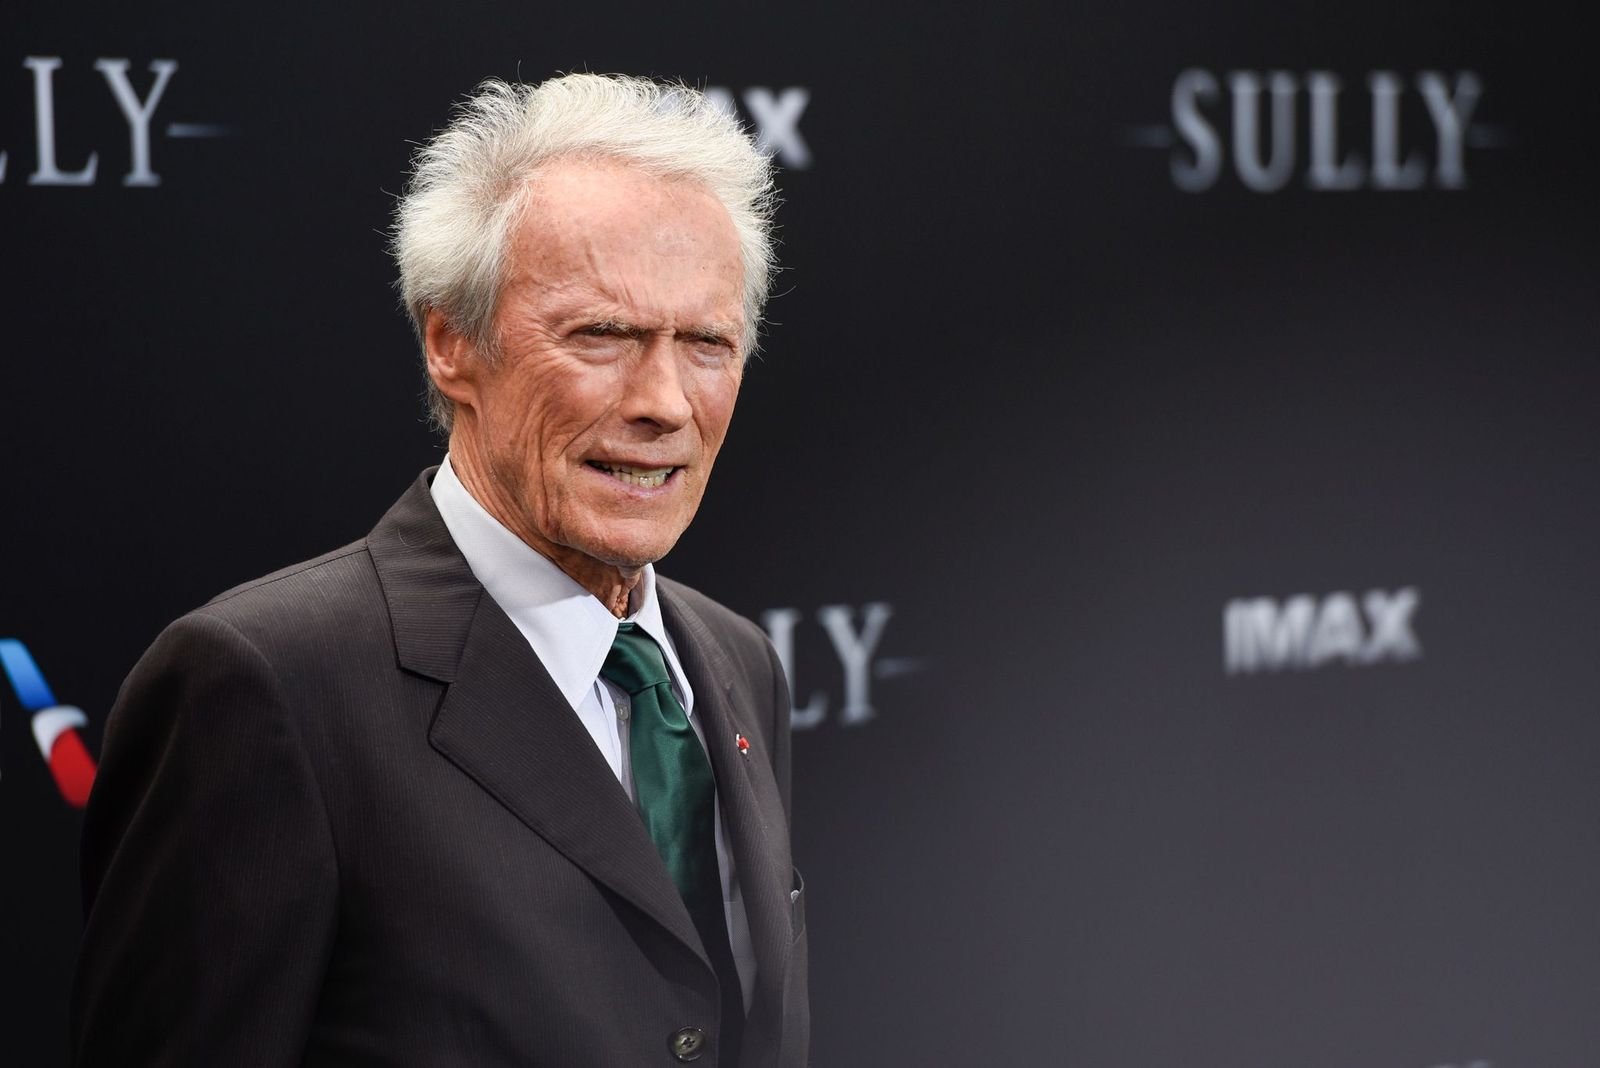 Clint Eastwood at the "Sully" New York Premiere at Alice Tully Hall on September 6, 2016 in New York City | Photo: Getty Images